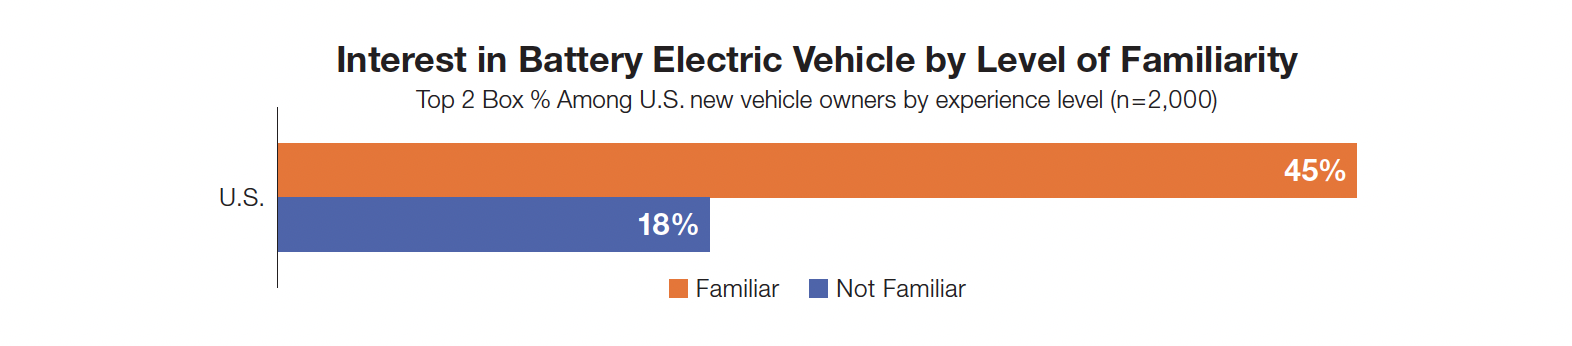 Interest in Battery Electric Vehicle by Level of Familiarity